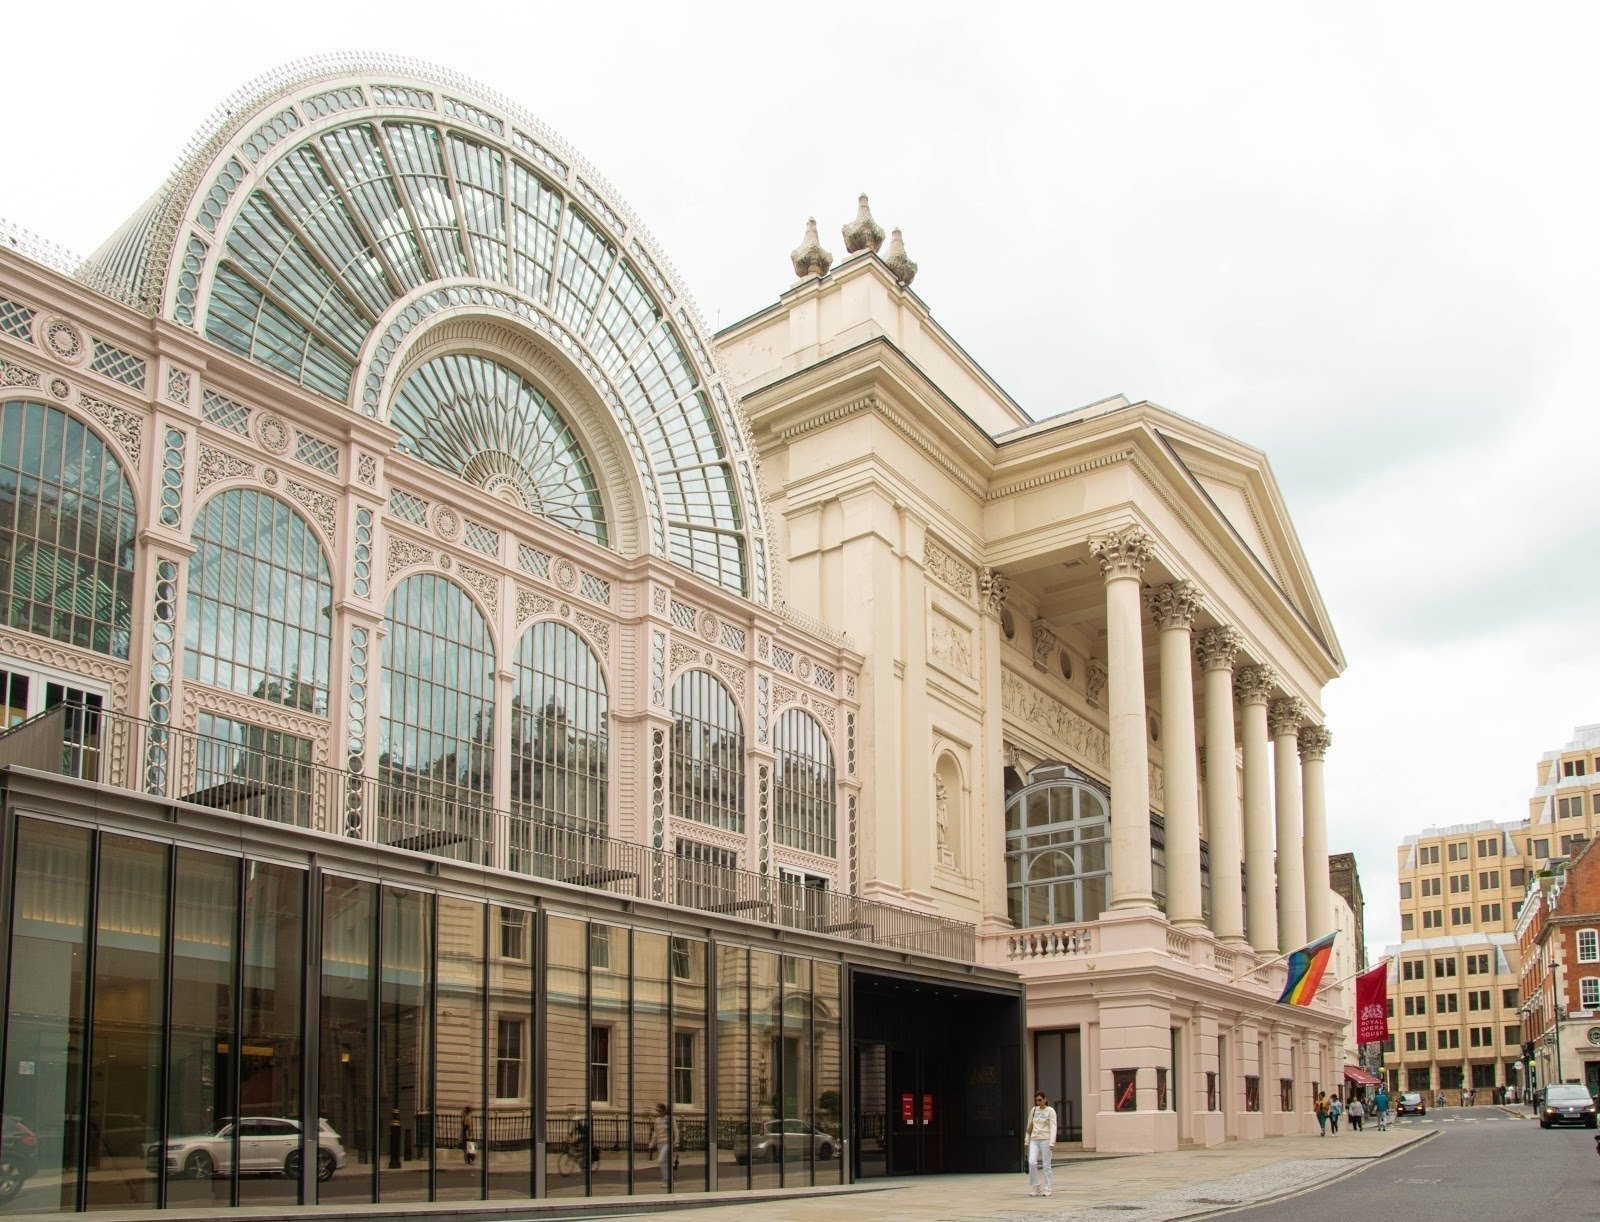 <span class="translation_missing" title="translation missing: en.meta.location_title, location_name: Royal Opera House, city: London">Location Title</span>